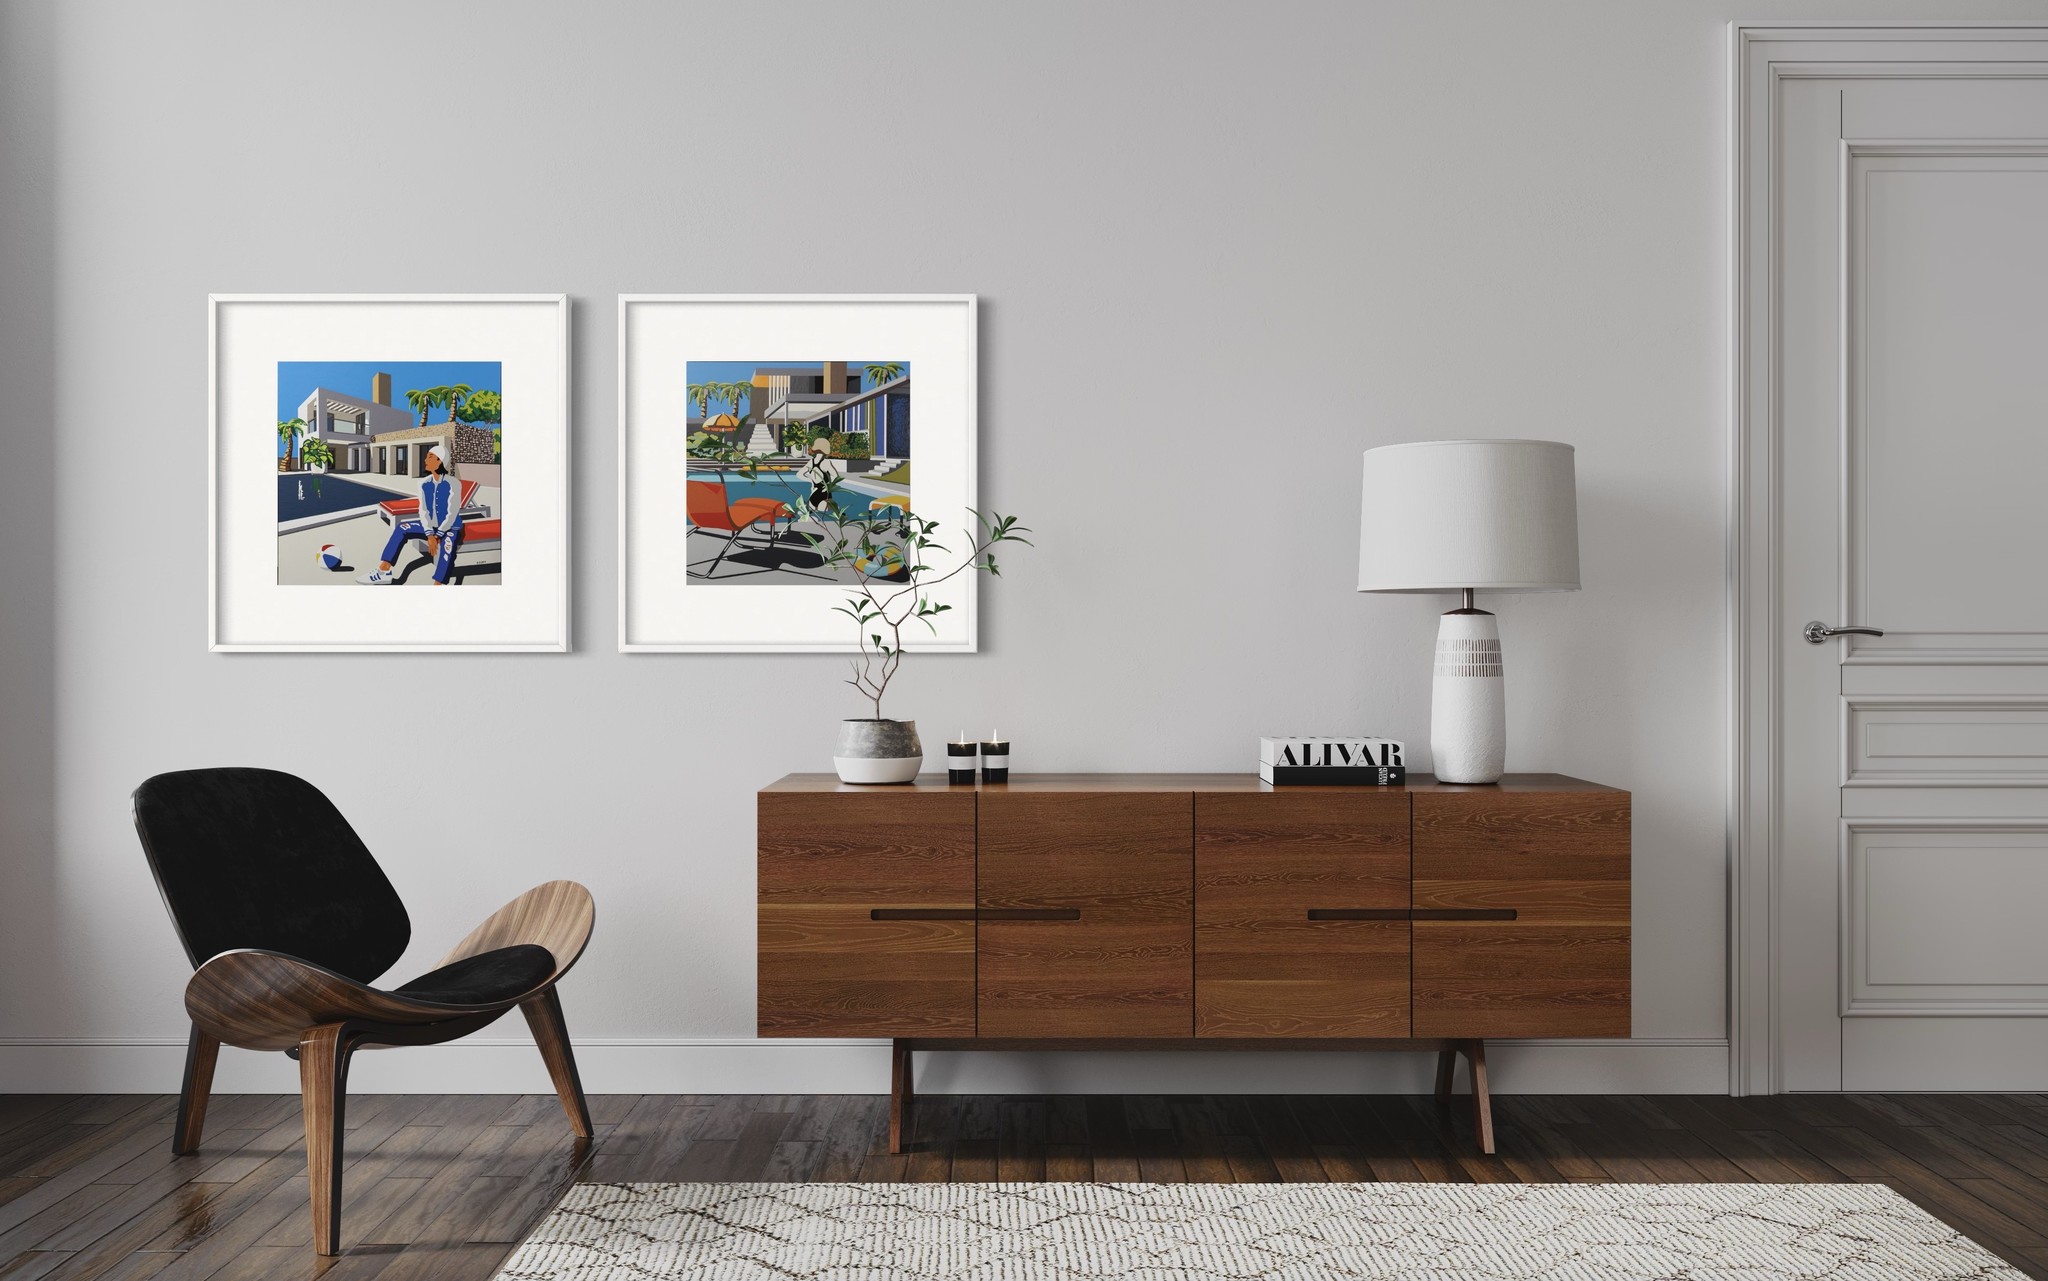 Prints vs. Paintings: Why Decorating with Framed Prints Can be the Smart Choice for Your Home or Office